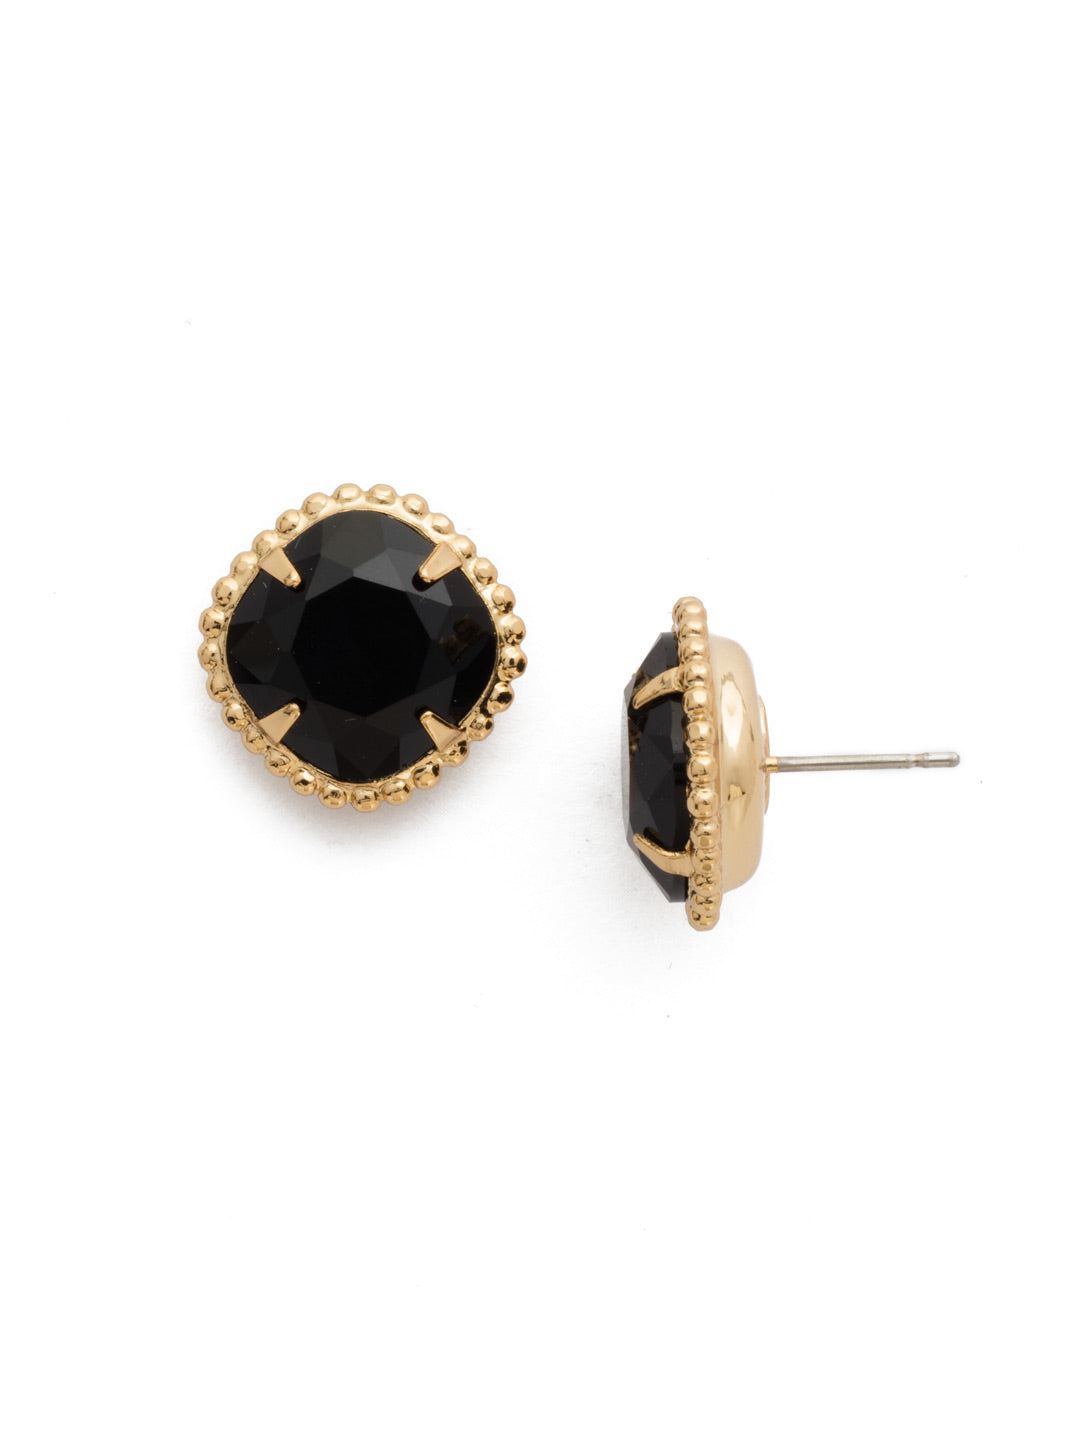 Product Image: Cushion-Cut Solitaire Stud Earrings